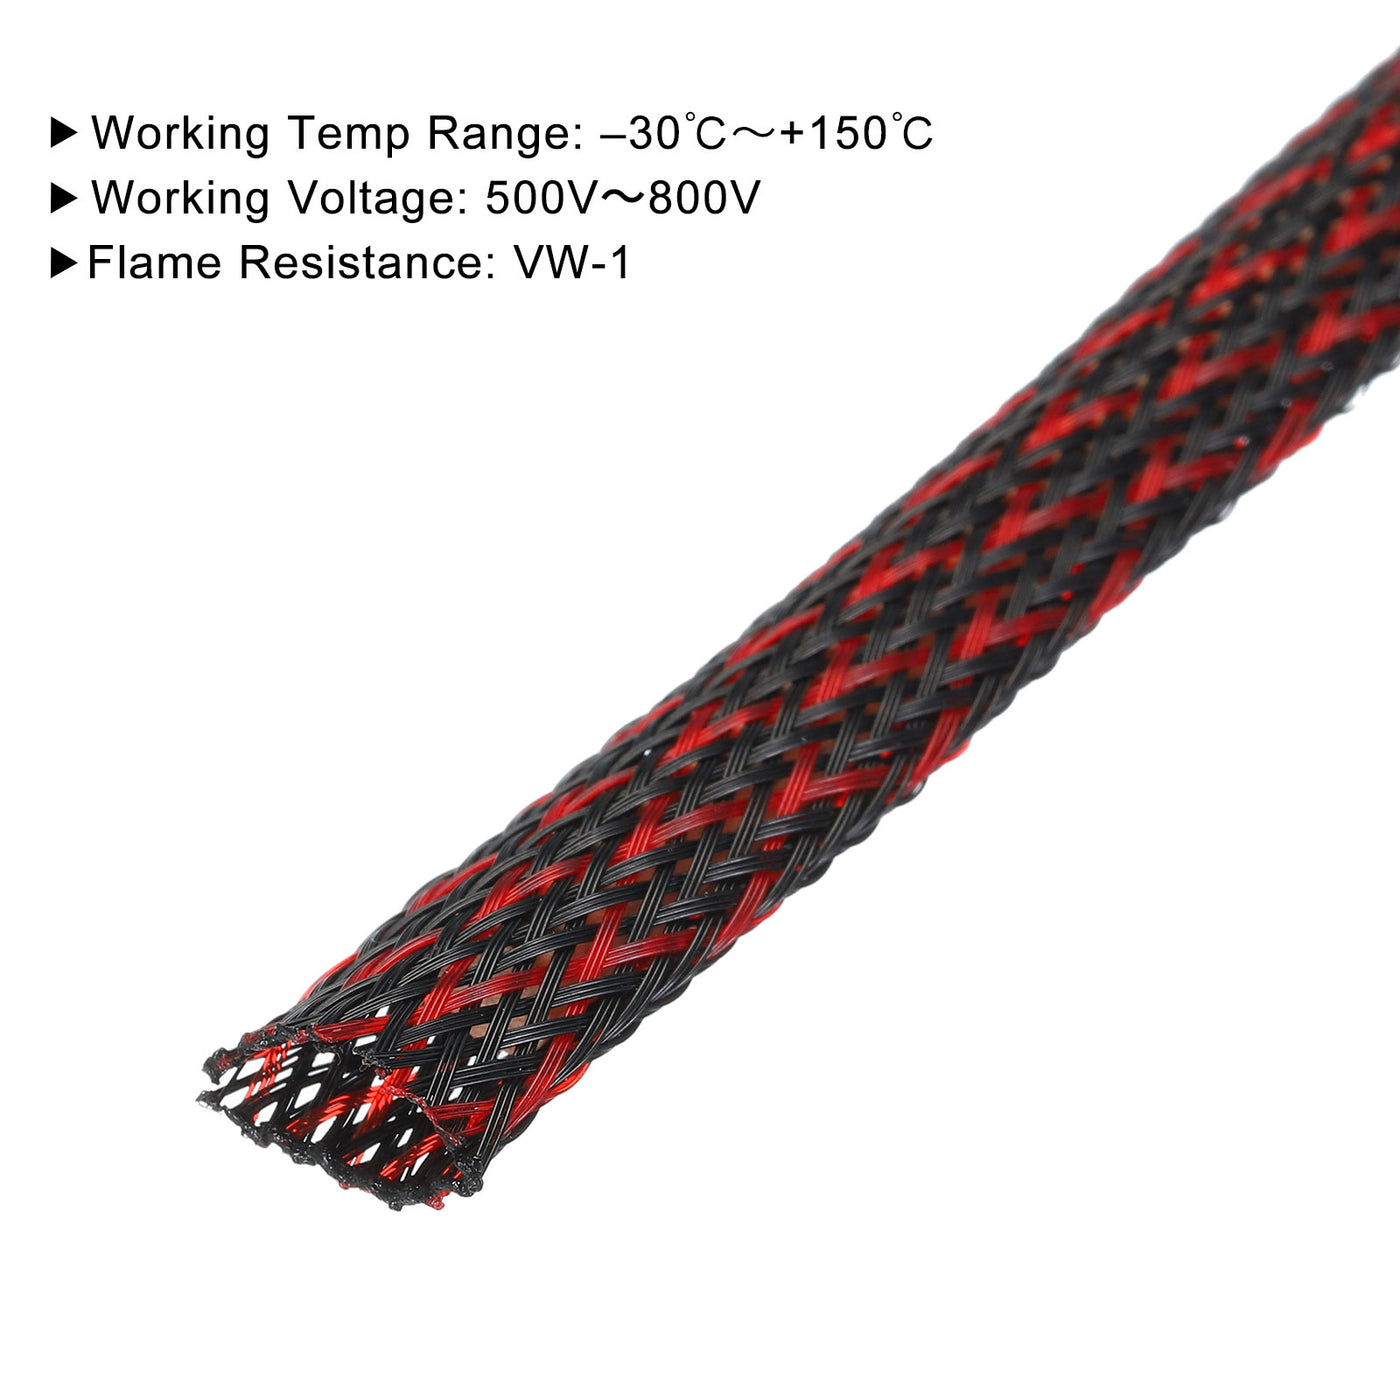 uxcell Uxcell Insulation Braid Sleeving, 16.4Ft-10mm High Temperature Sleeve Black Red